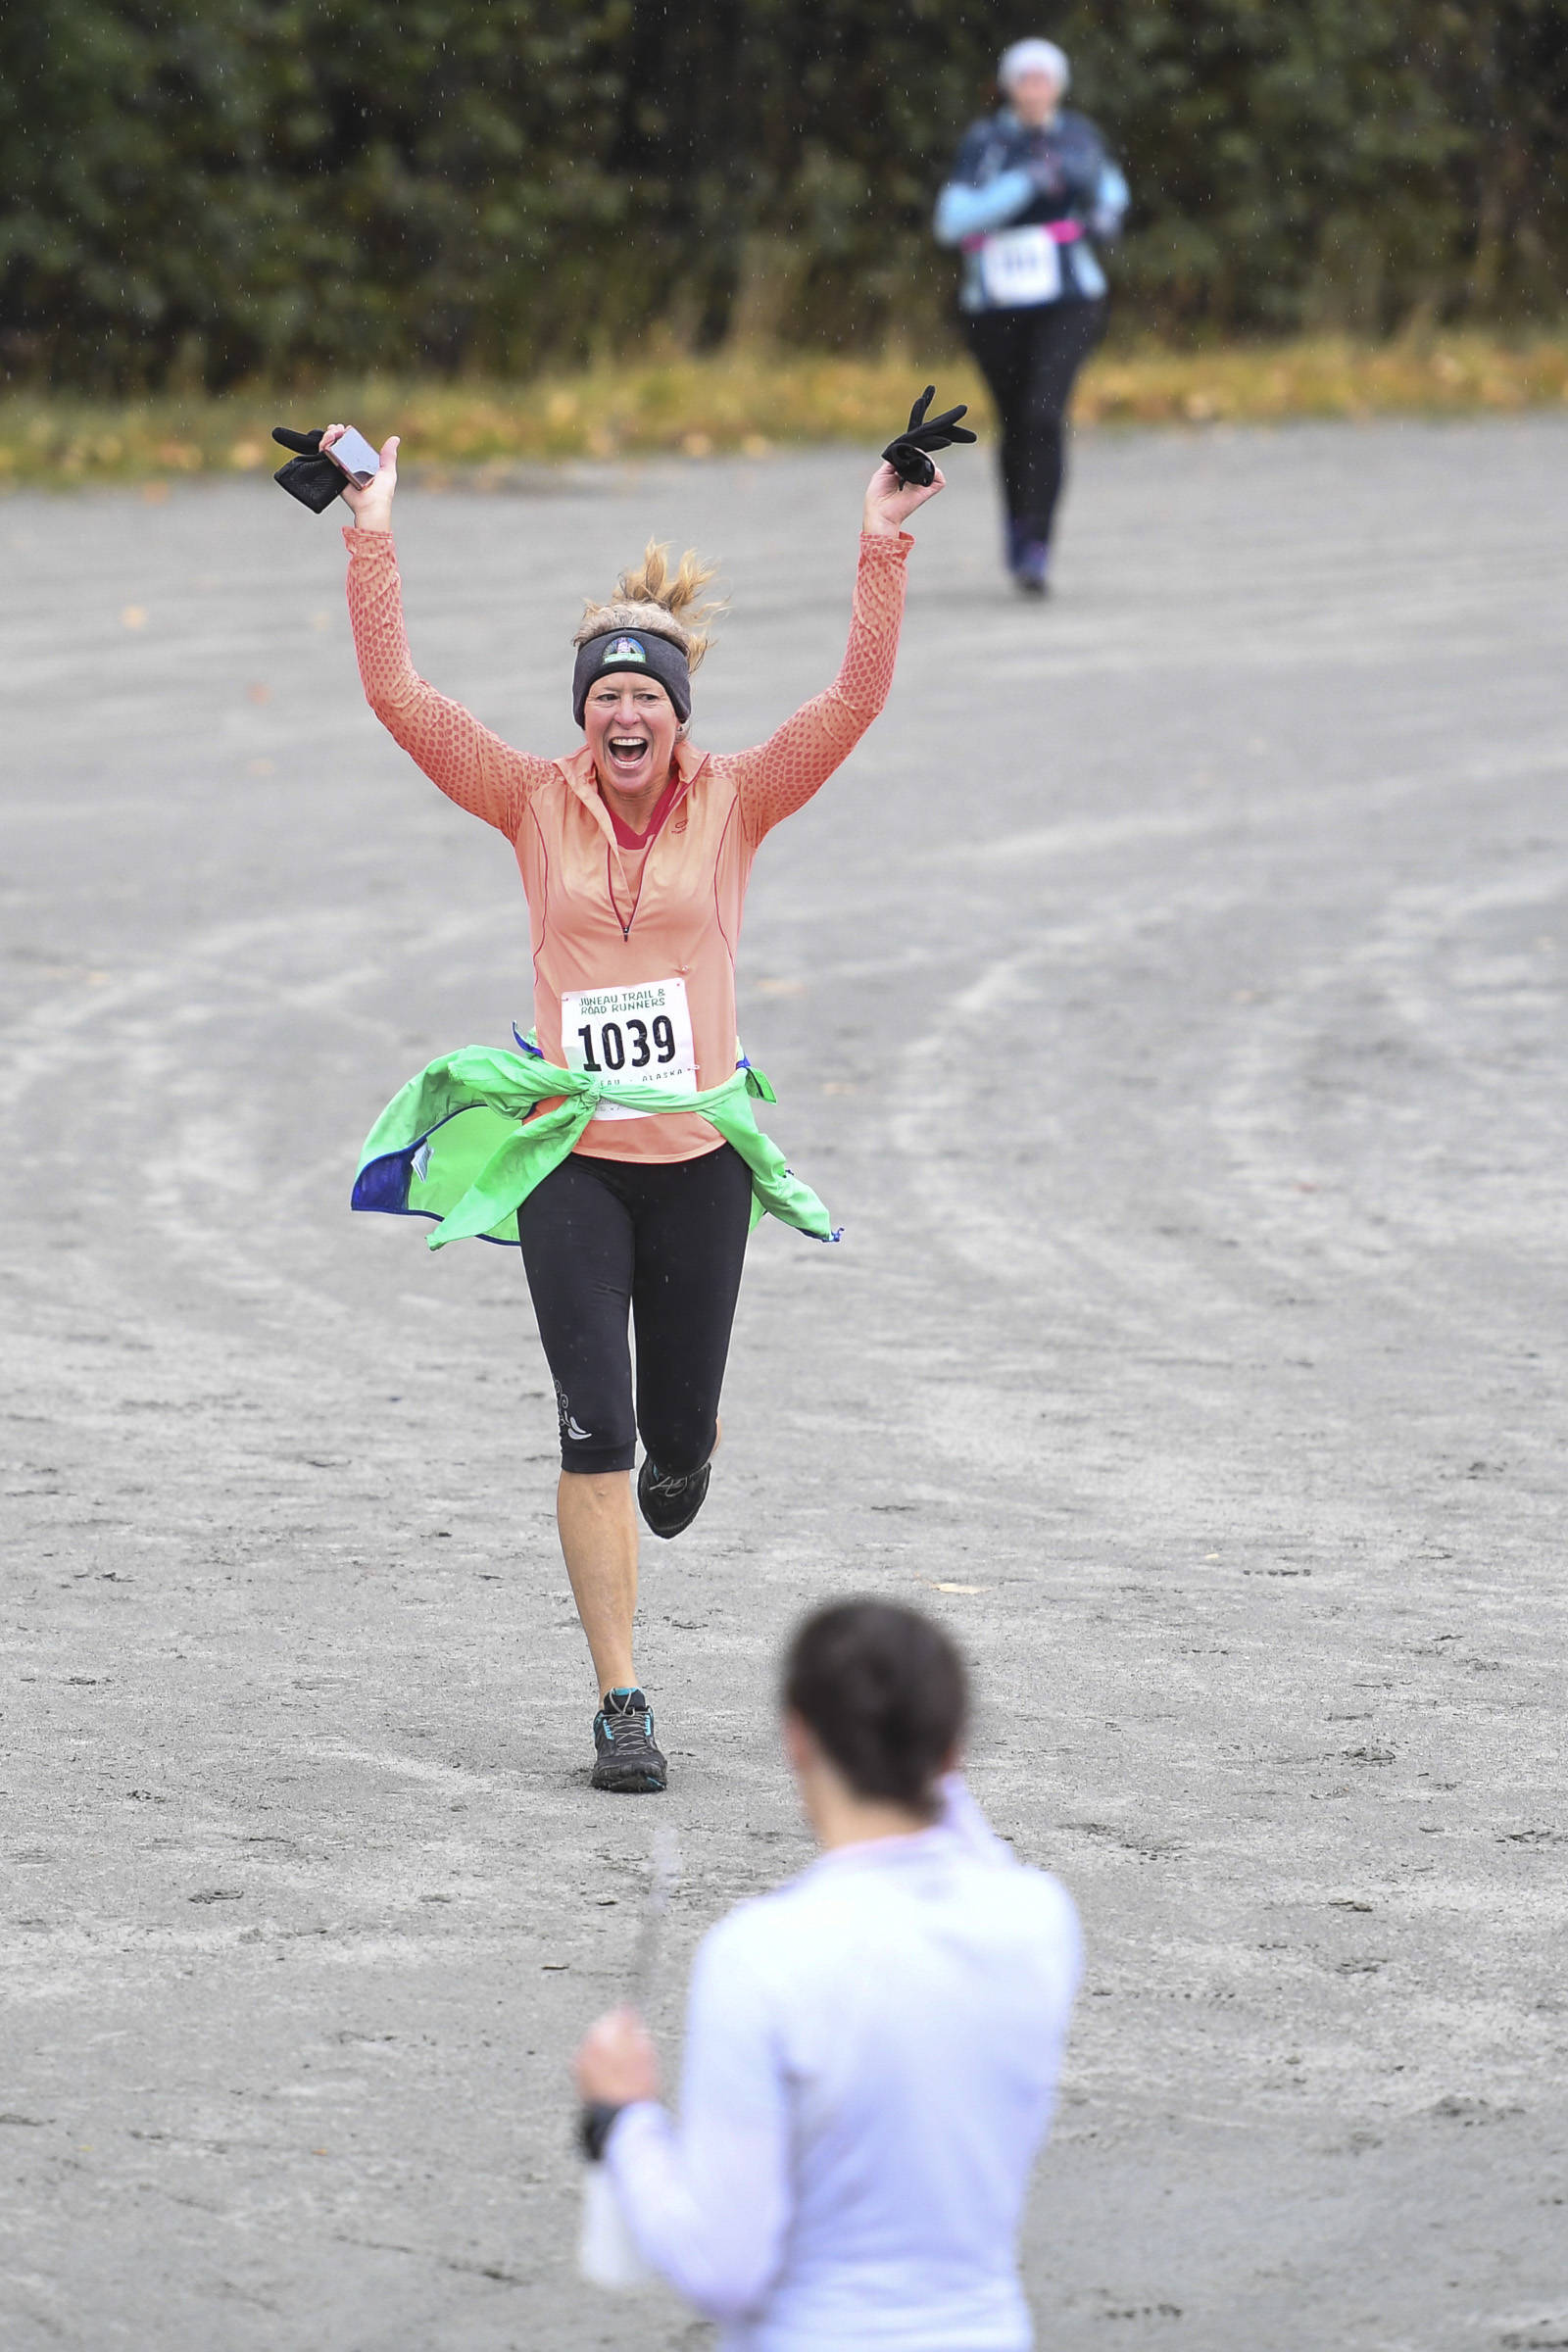 Colleen Jones celebrates her finish at the annual community mental health run, the Extra Tough 5K & 1 Mile Run, on Saturday, Oct. 12, 2019, at Riverbend Elementary School. The run is sponsored by National Alliance on Mental Illness (NAMI) Juneau. (Michael Penn | Juneau Empire)